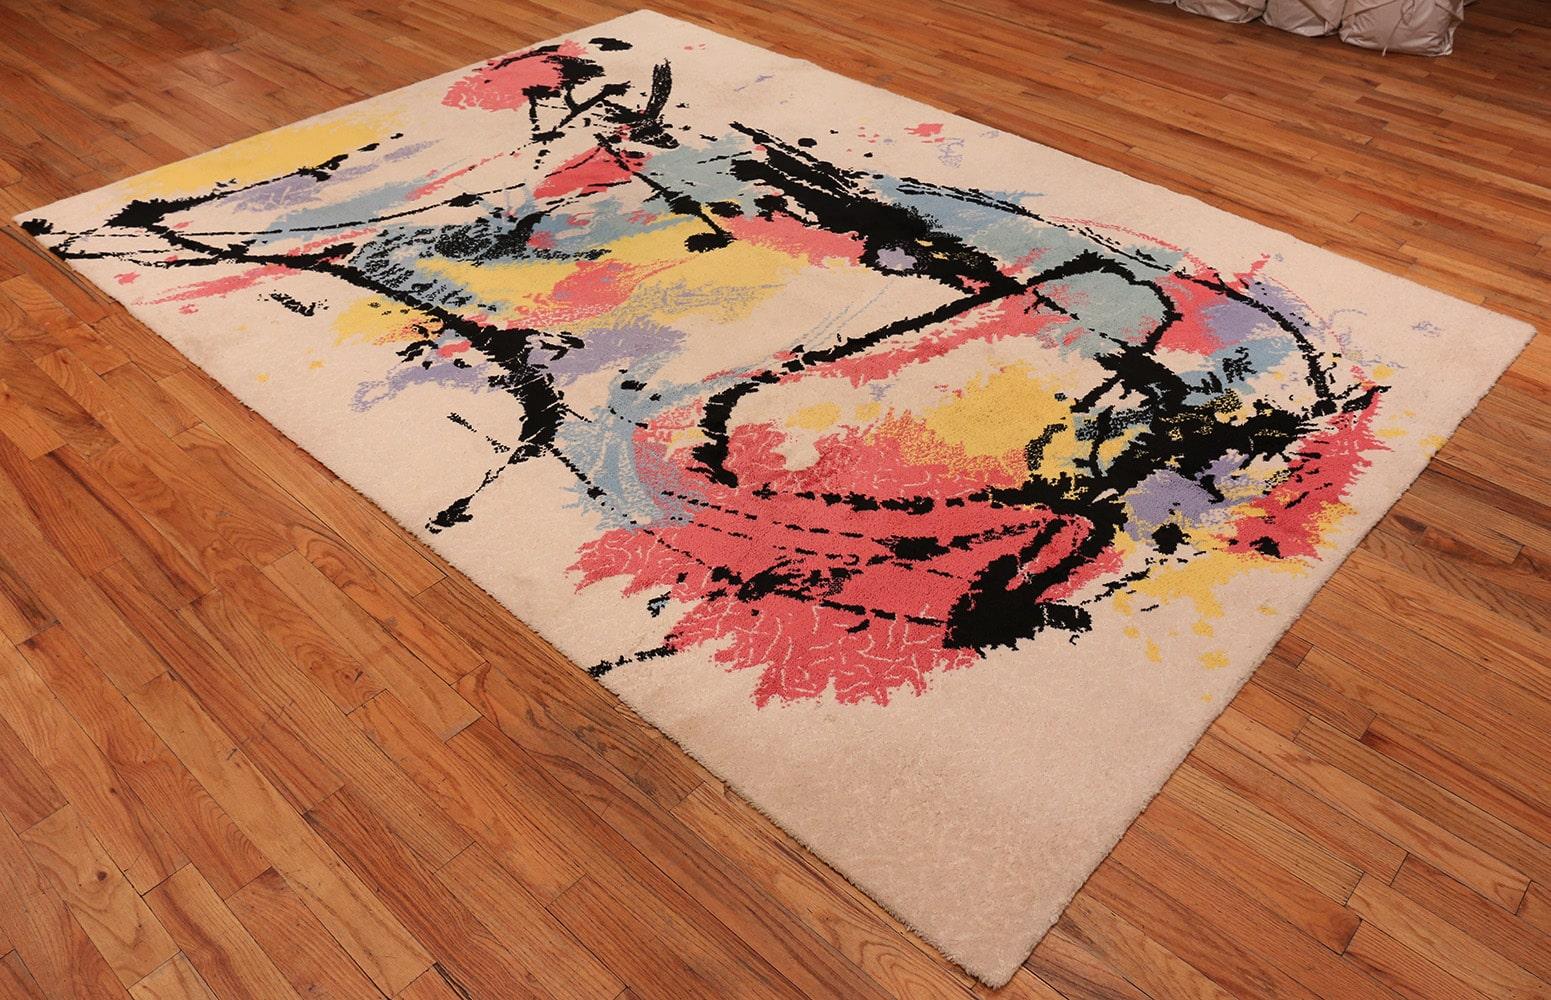 A beautifully artistic vintage Swedish Robert Jacobsen Ege rug, country of origin / rug type: Vintage Ege rug, circa mid–20th century. Size: 8 ft x 11 ft (2.44 m x 3.35 m)

This brilliant, abstract vintage rug by artist Robert Jacobsen was designed